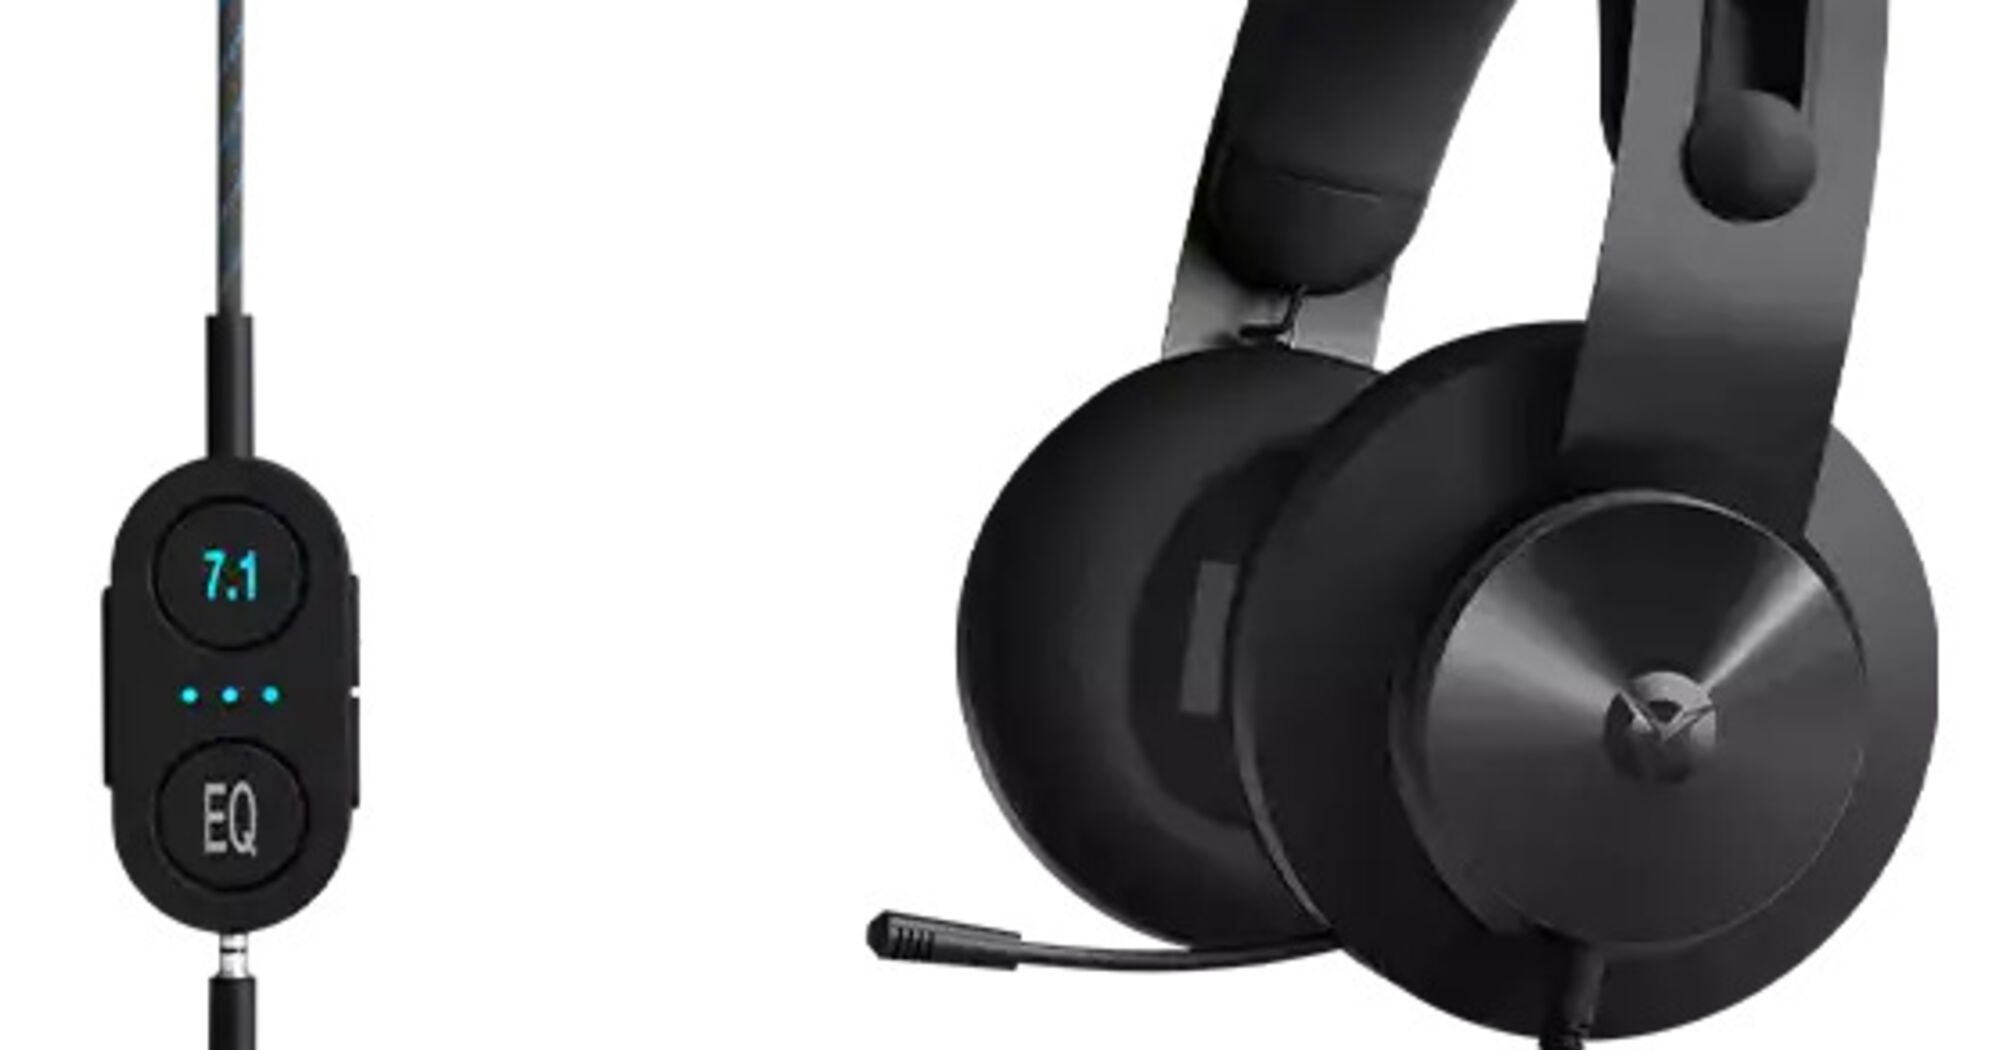 Legion H7 gaming headphones with 7.1 surround sound and USB Type-C port